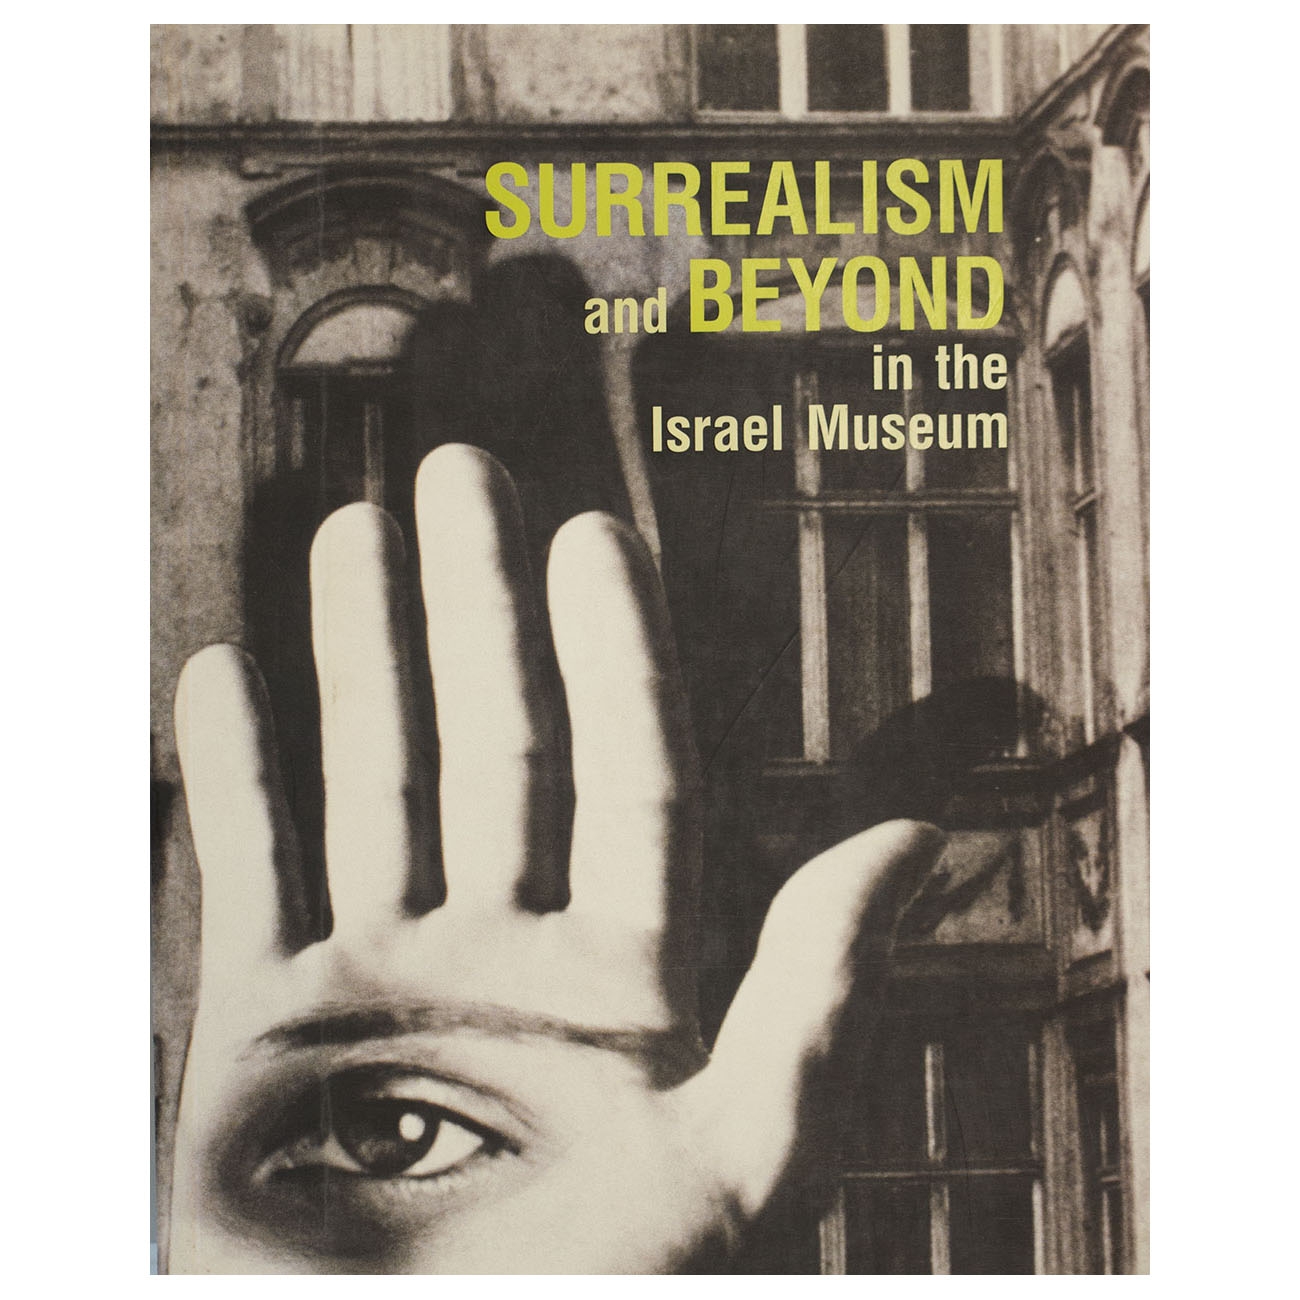  Surrealism and Beyond in the Israel Museum - 1